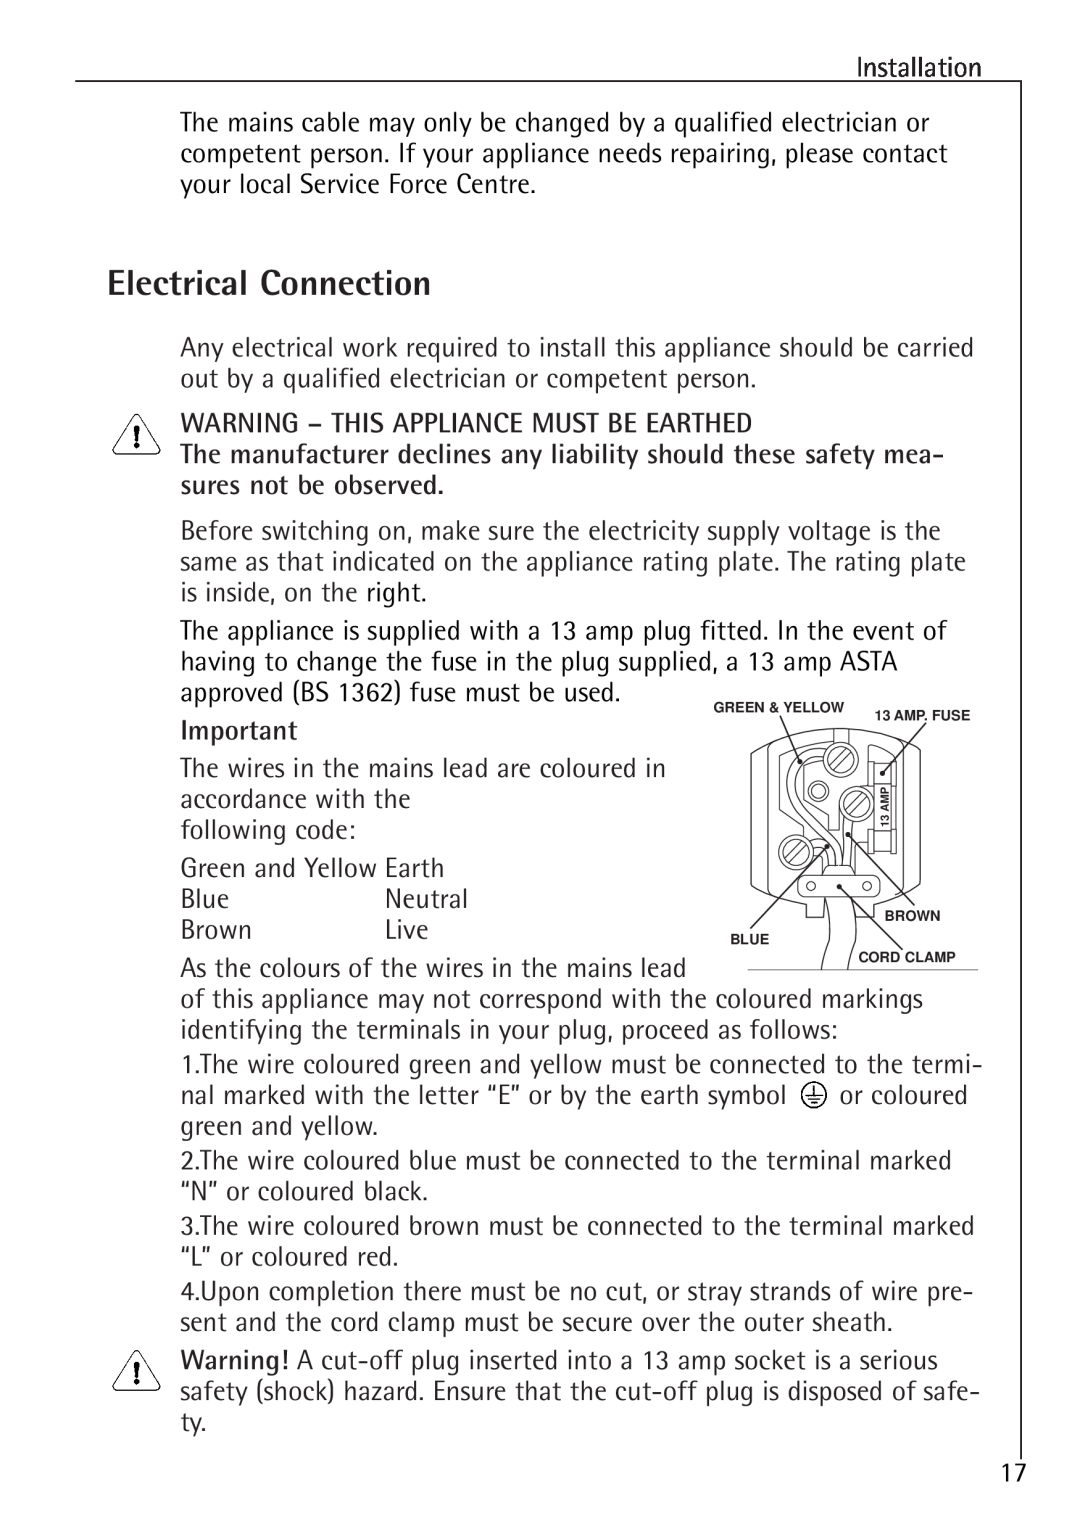 Electrolux U 86000-4 manual Electrical Connection, Warning - This Appliance Must Be Earthed 